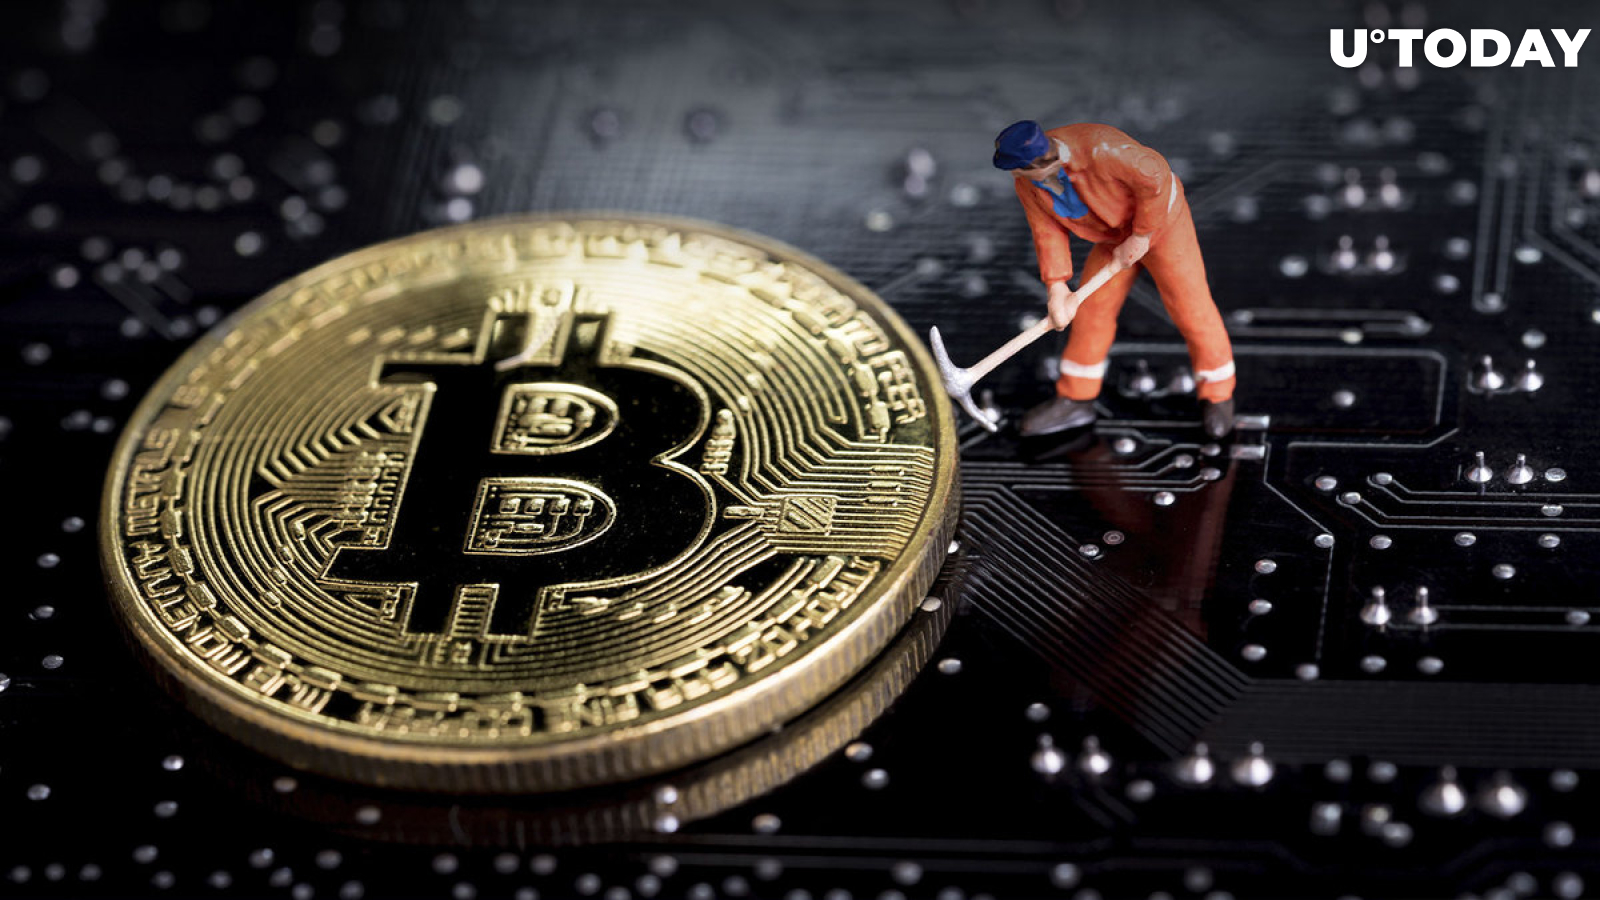 Bitcoin Miners Selling 135% of Their Profits: Details